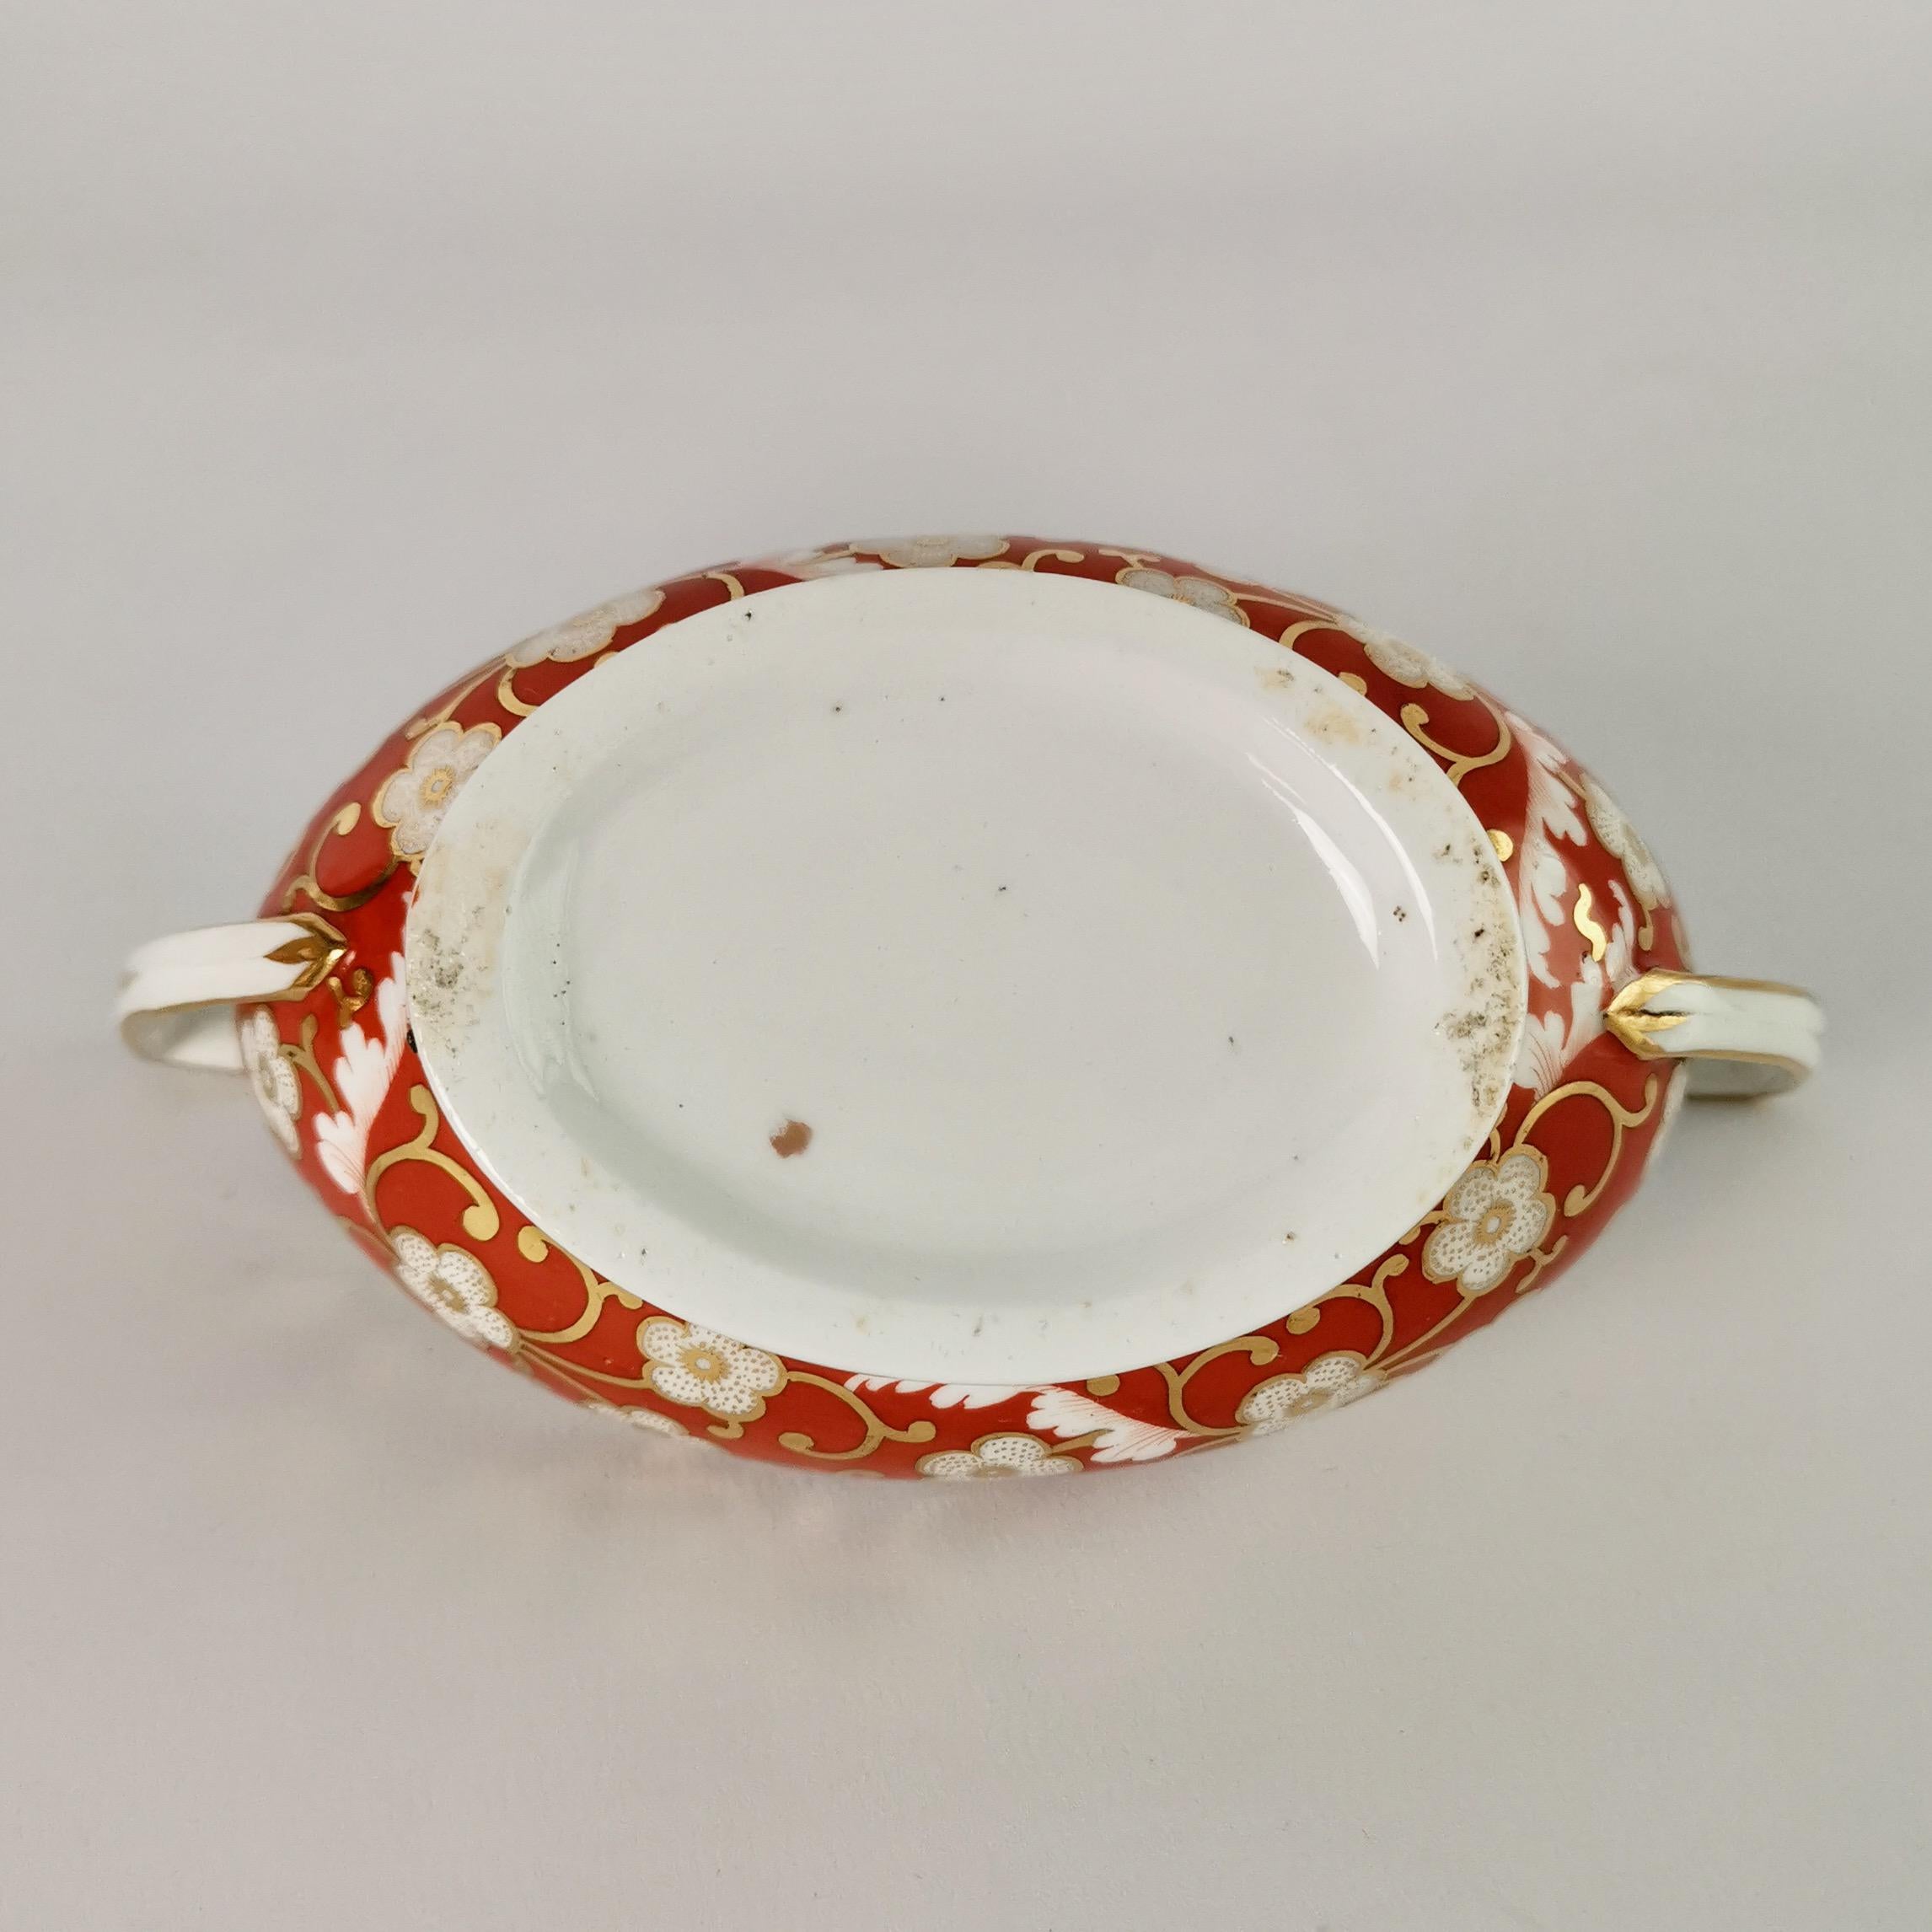 Chamberlains Worcester Tiny Tea Service for Two, Orange Floral, Regency ca 1805 7